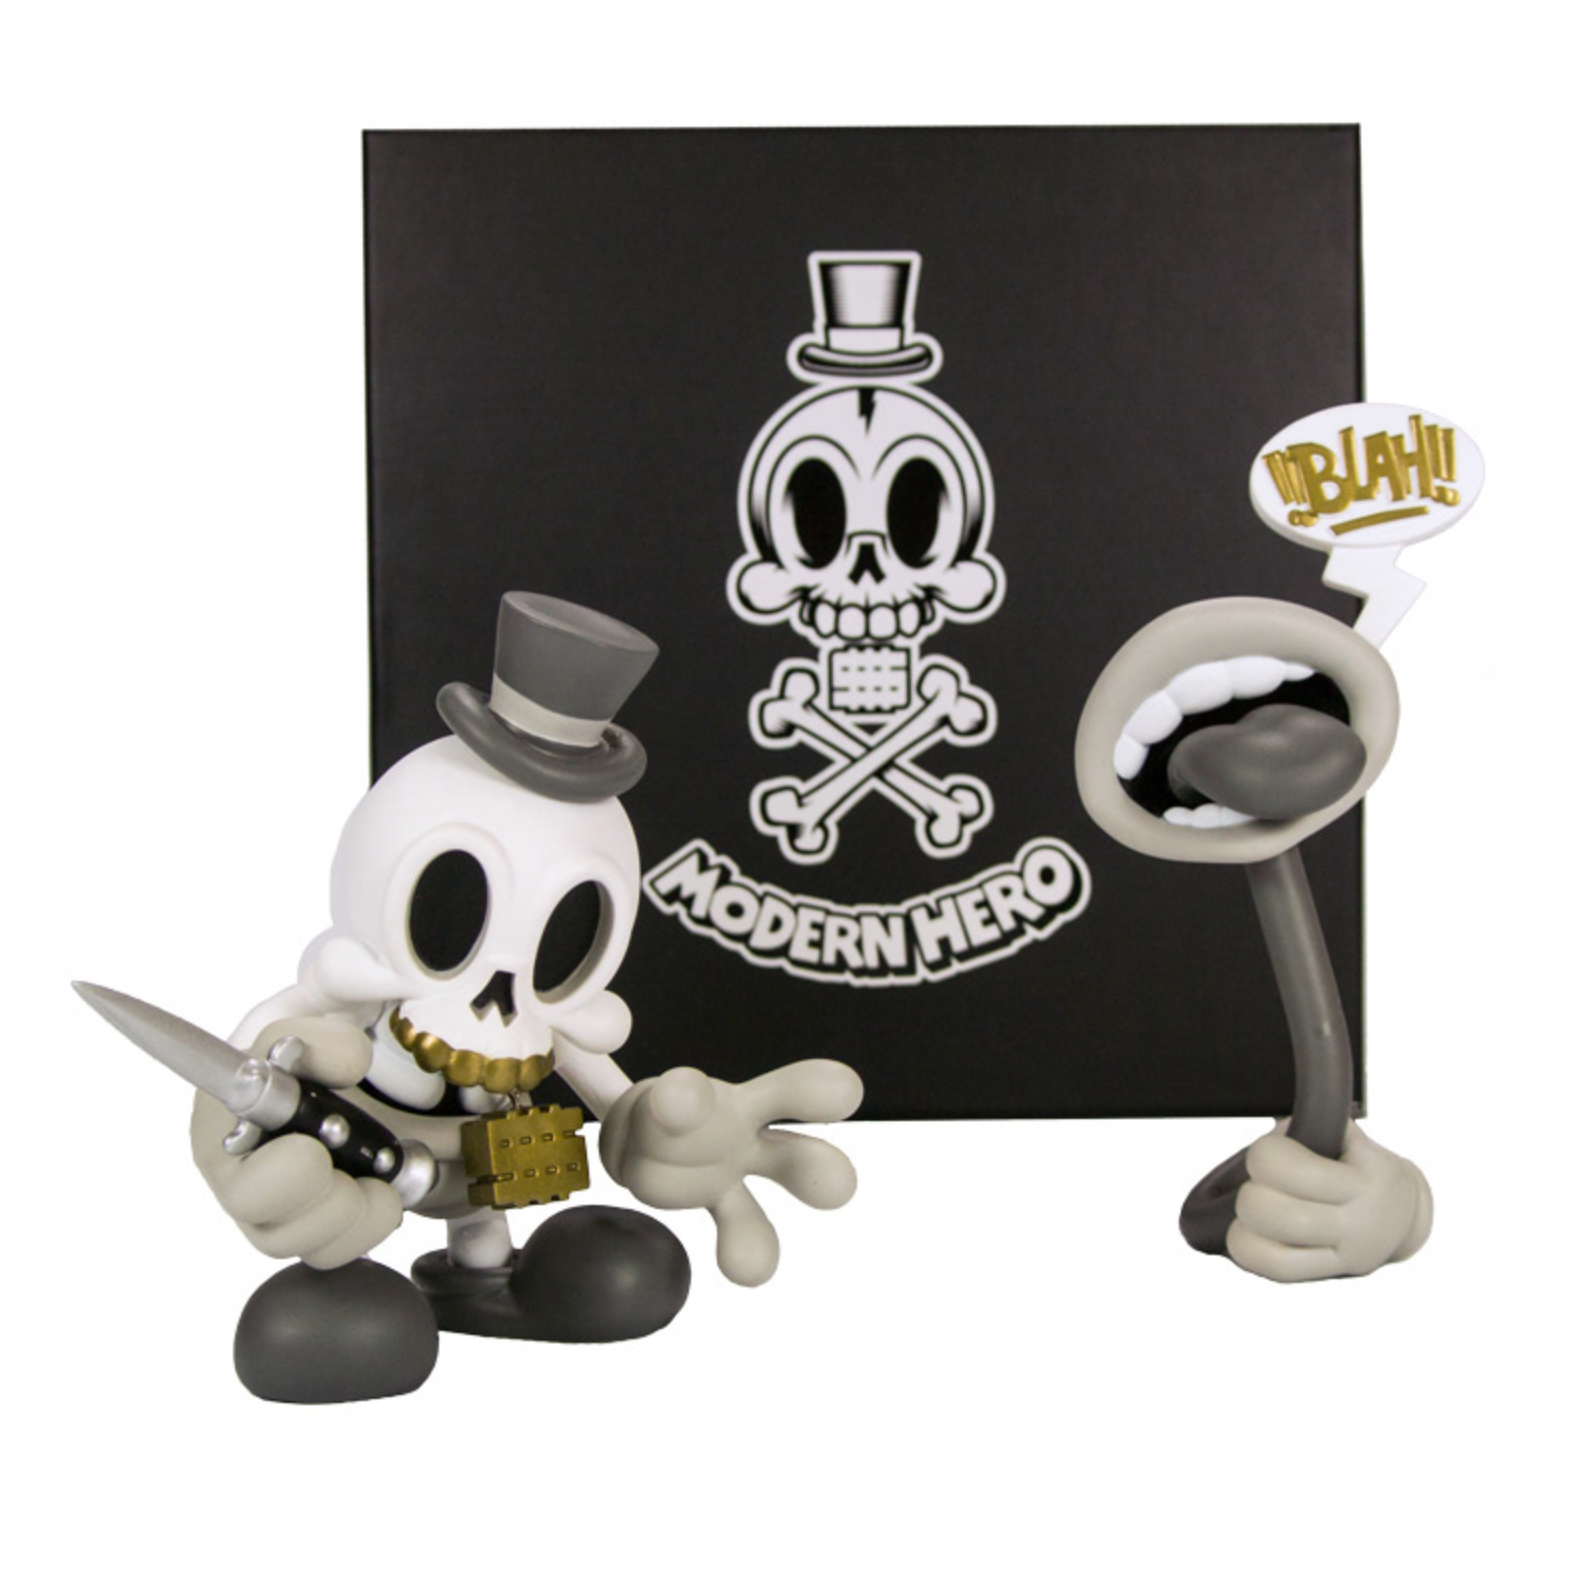 MAD Modern Hero OG Grey Edition 6-inch vinyl figure available now ! ! !